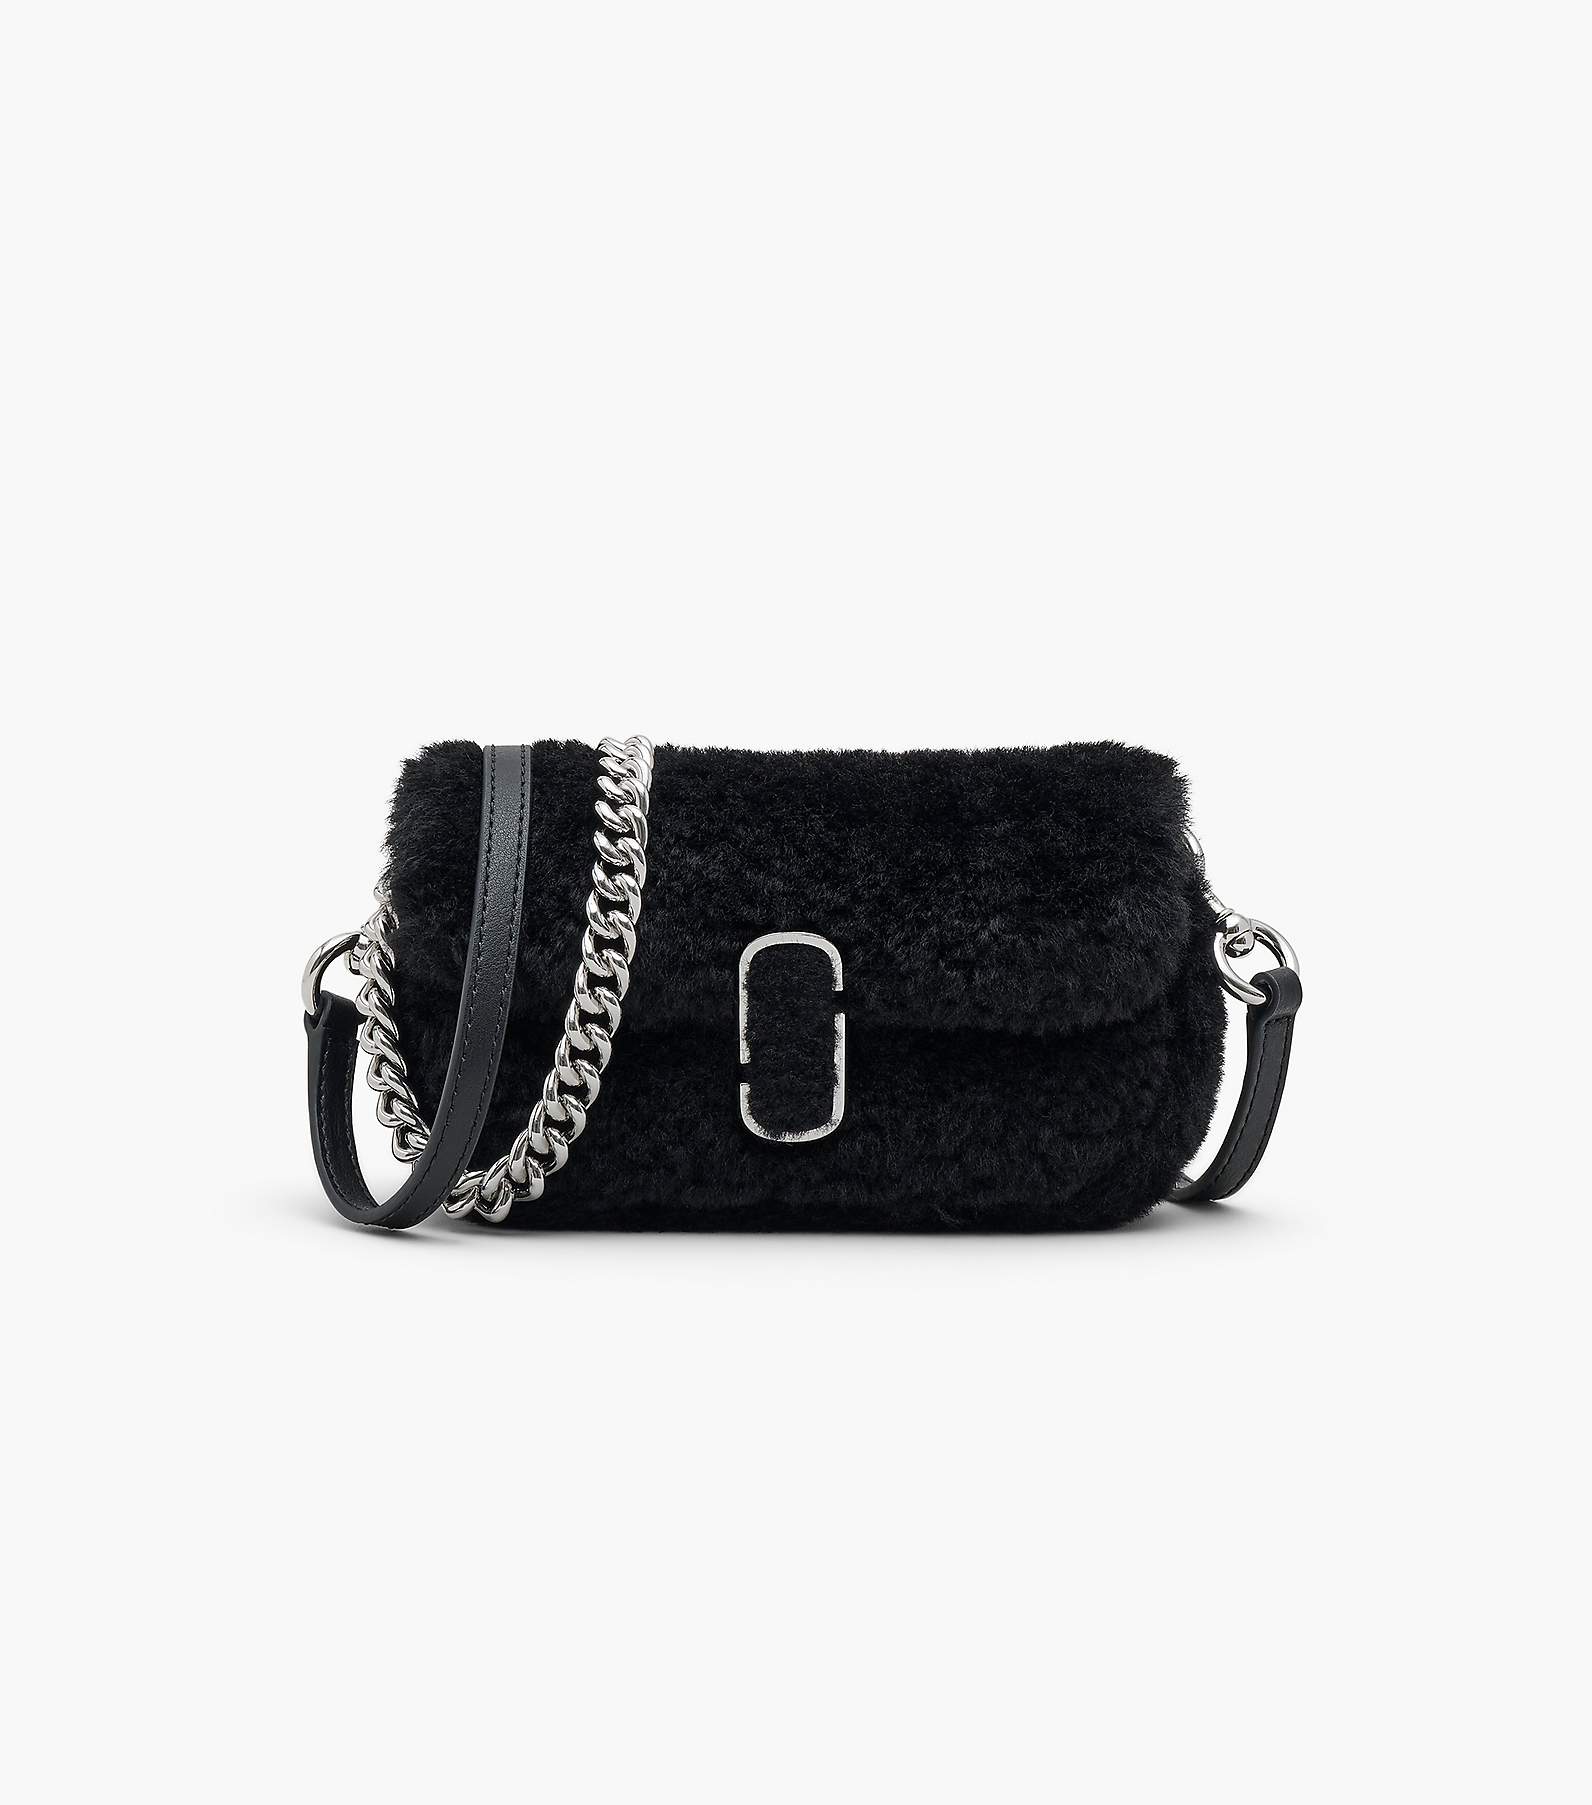 Marc Jacobs, Bags, Marc Jacobs Heart To Heart Crossbody Bag With Dust Bag